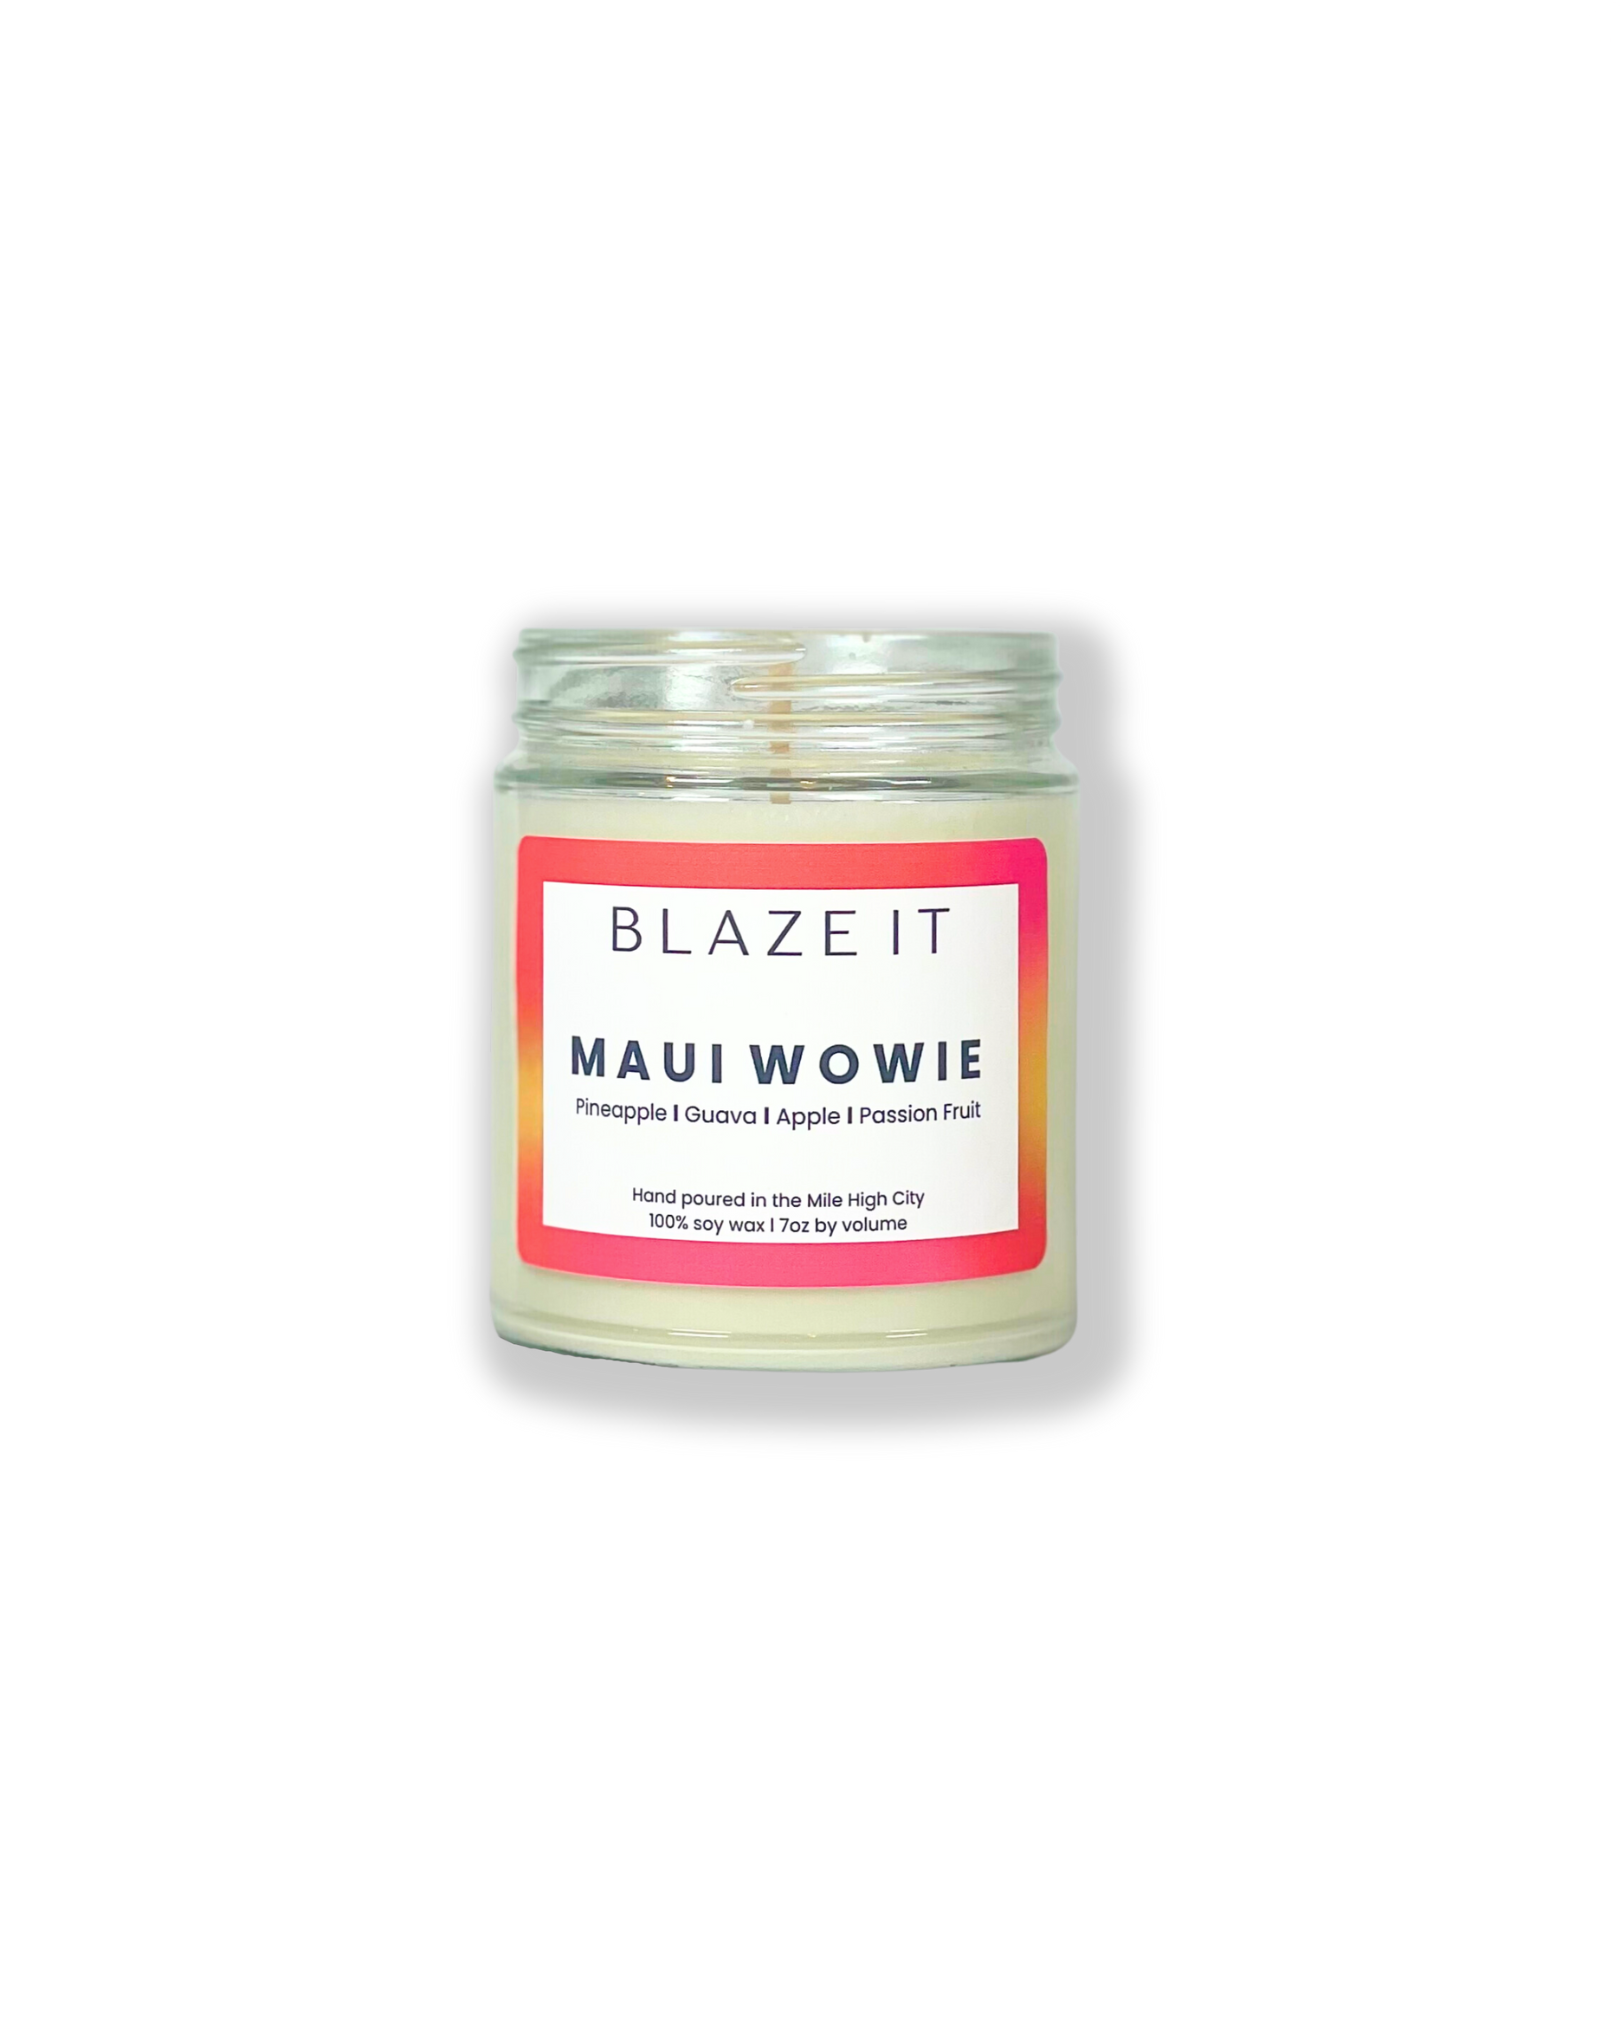 Maui Wowie candle with notes of PIneapple, Guava, Apple and Passion Fruit l Blaze It Candle Co